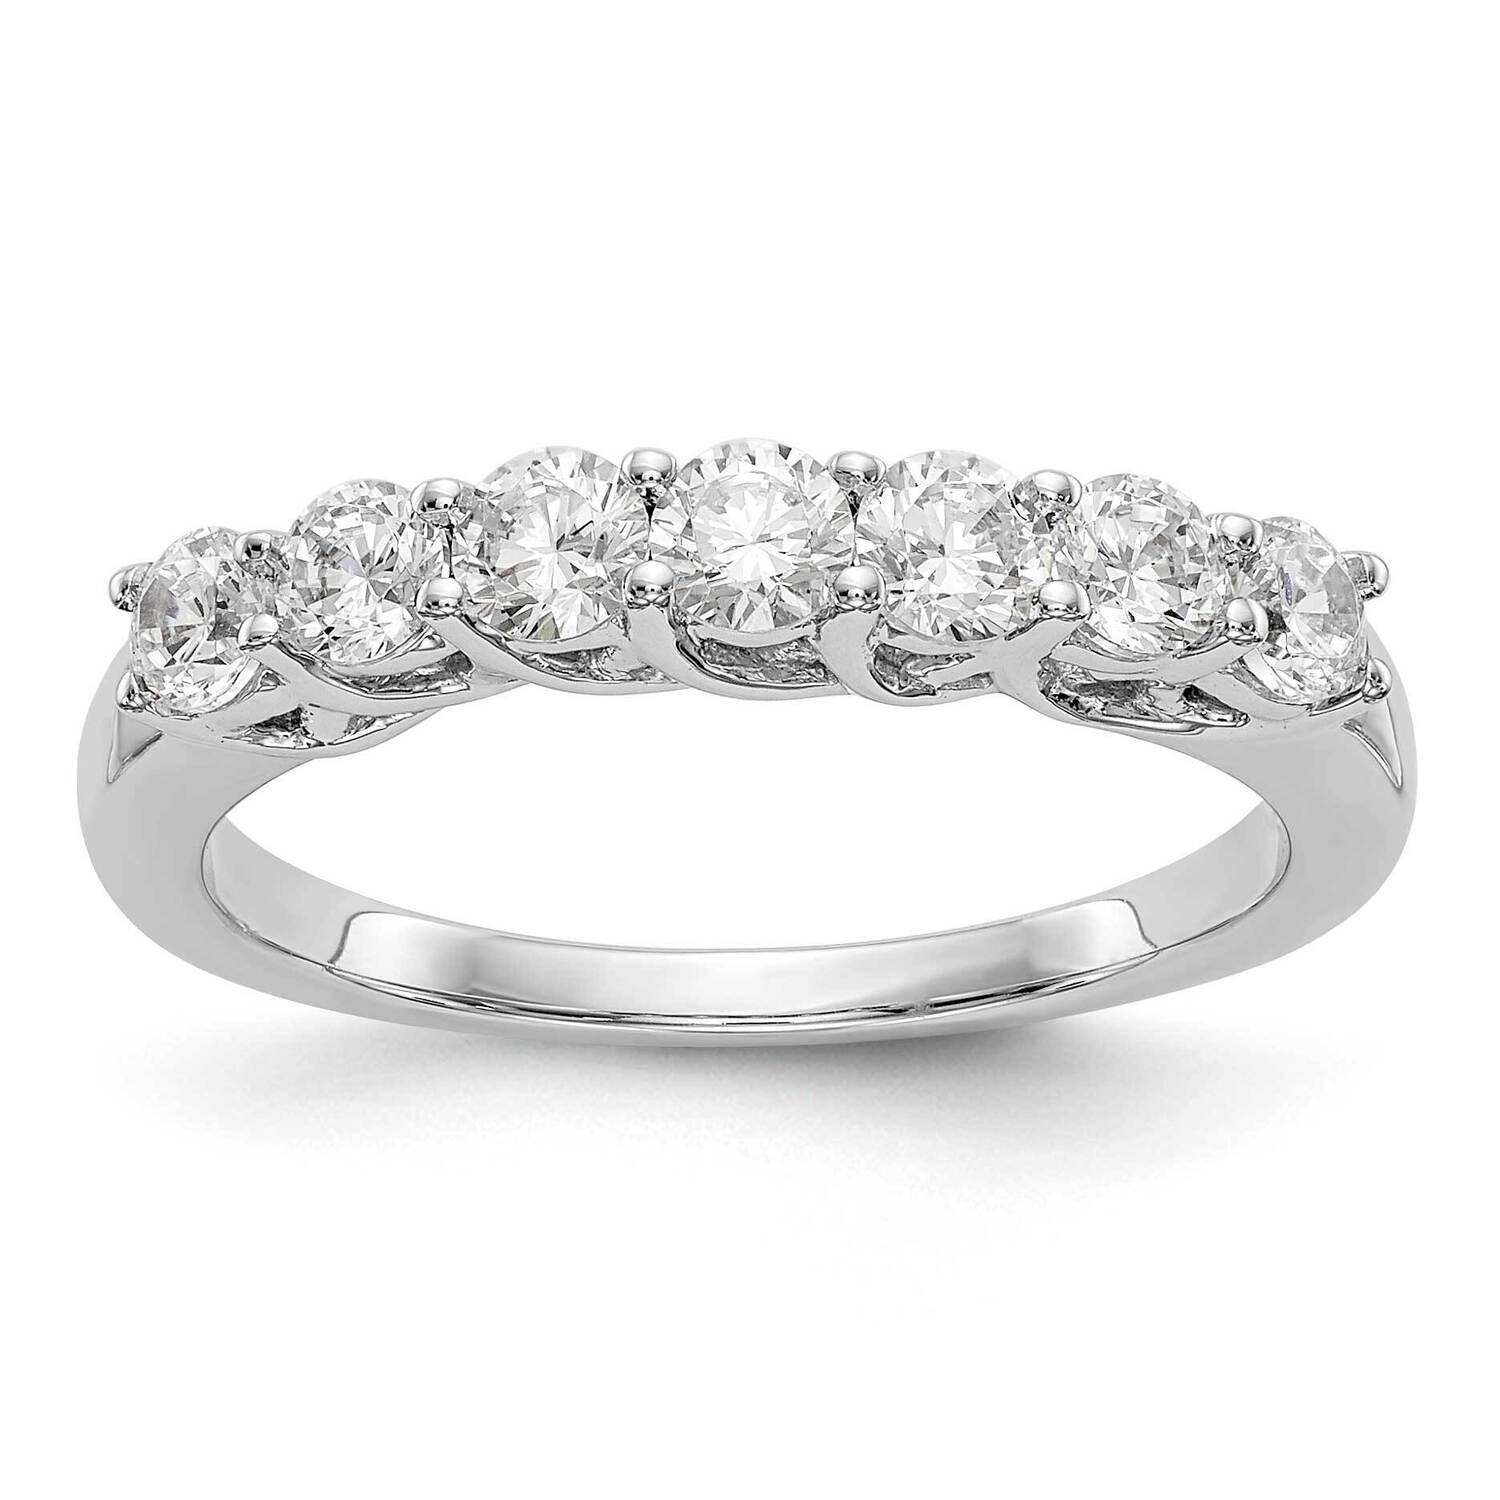 7-Stone Shared Prong Holds 3-3.2 4-3.0mm Round Diamond Band Ring Mounting 14k White Gold RM3526B-083-WAA